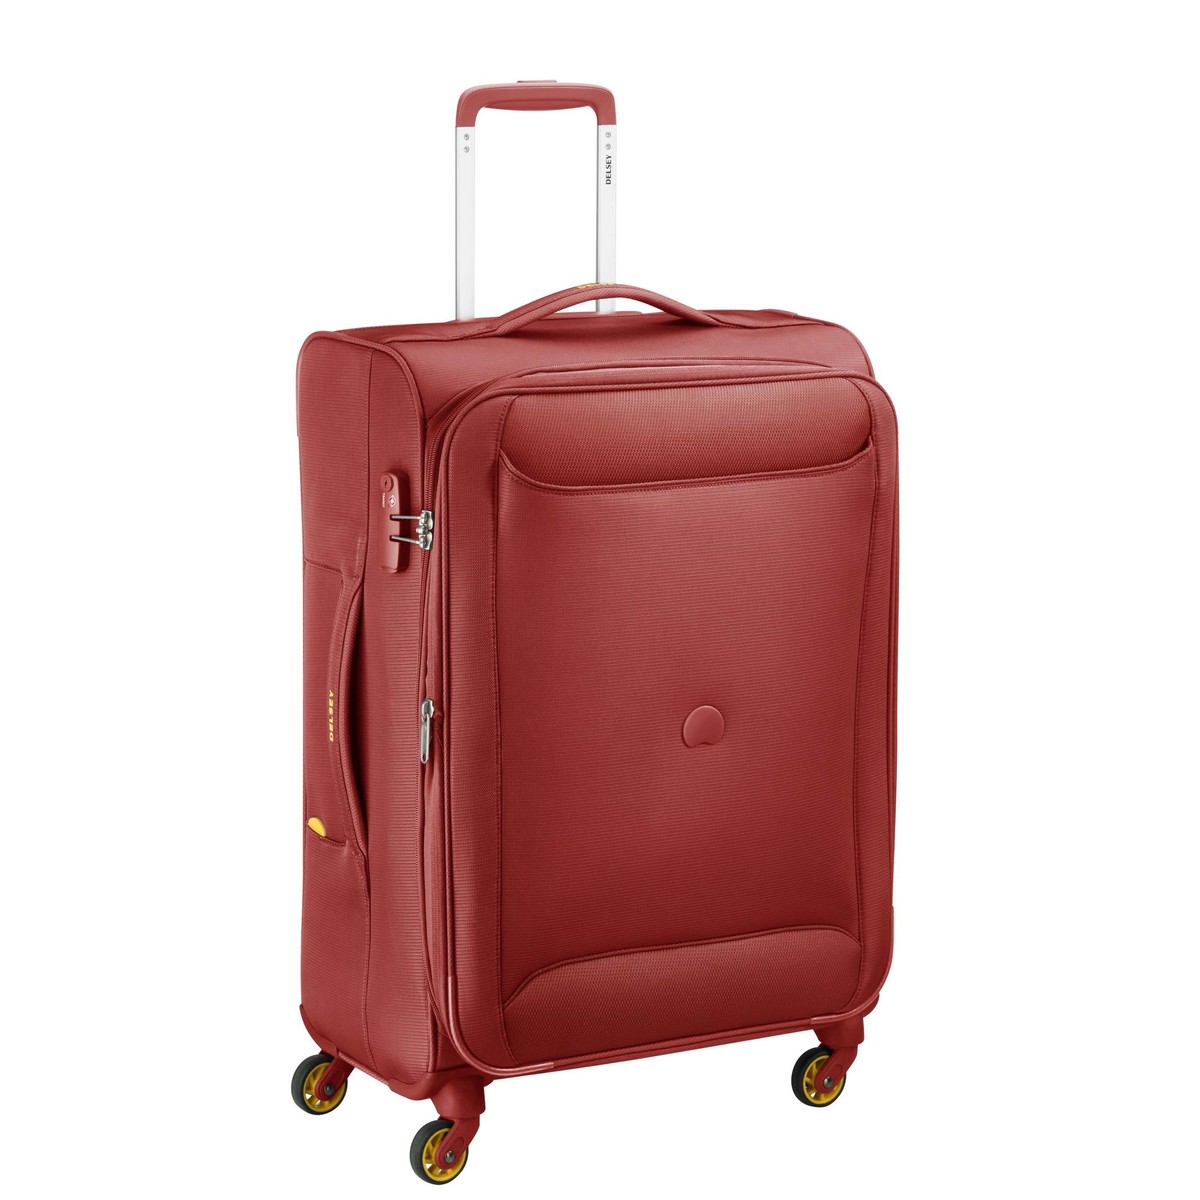 Delsey Chartreuse 4Wheel Soft Trolley 71cm Red